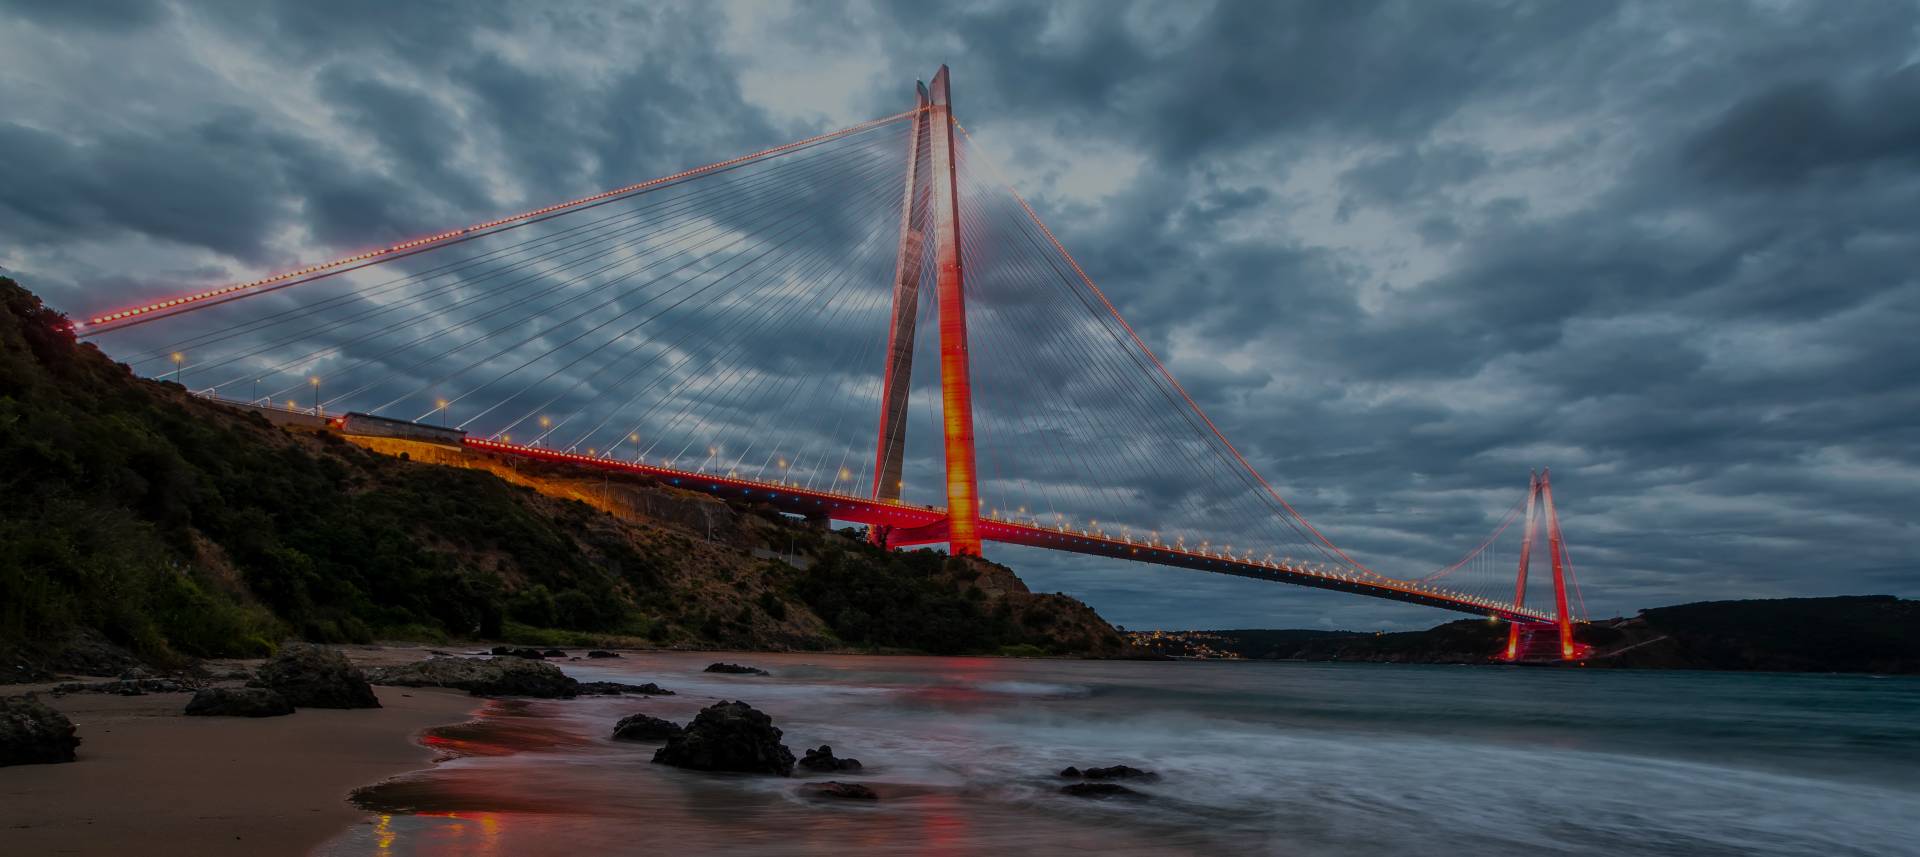 YAVUZ SULTAN SELİM BRIDGE  YAVUZ SULTAN SELİM BRIDGE  AND NORTHERN RING MOTORWAY